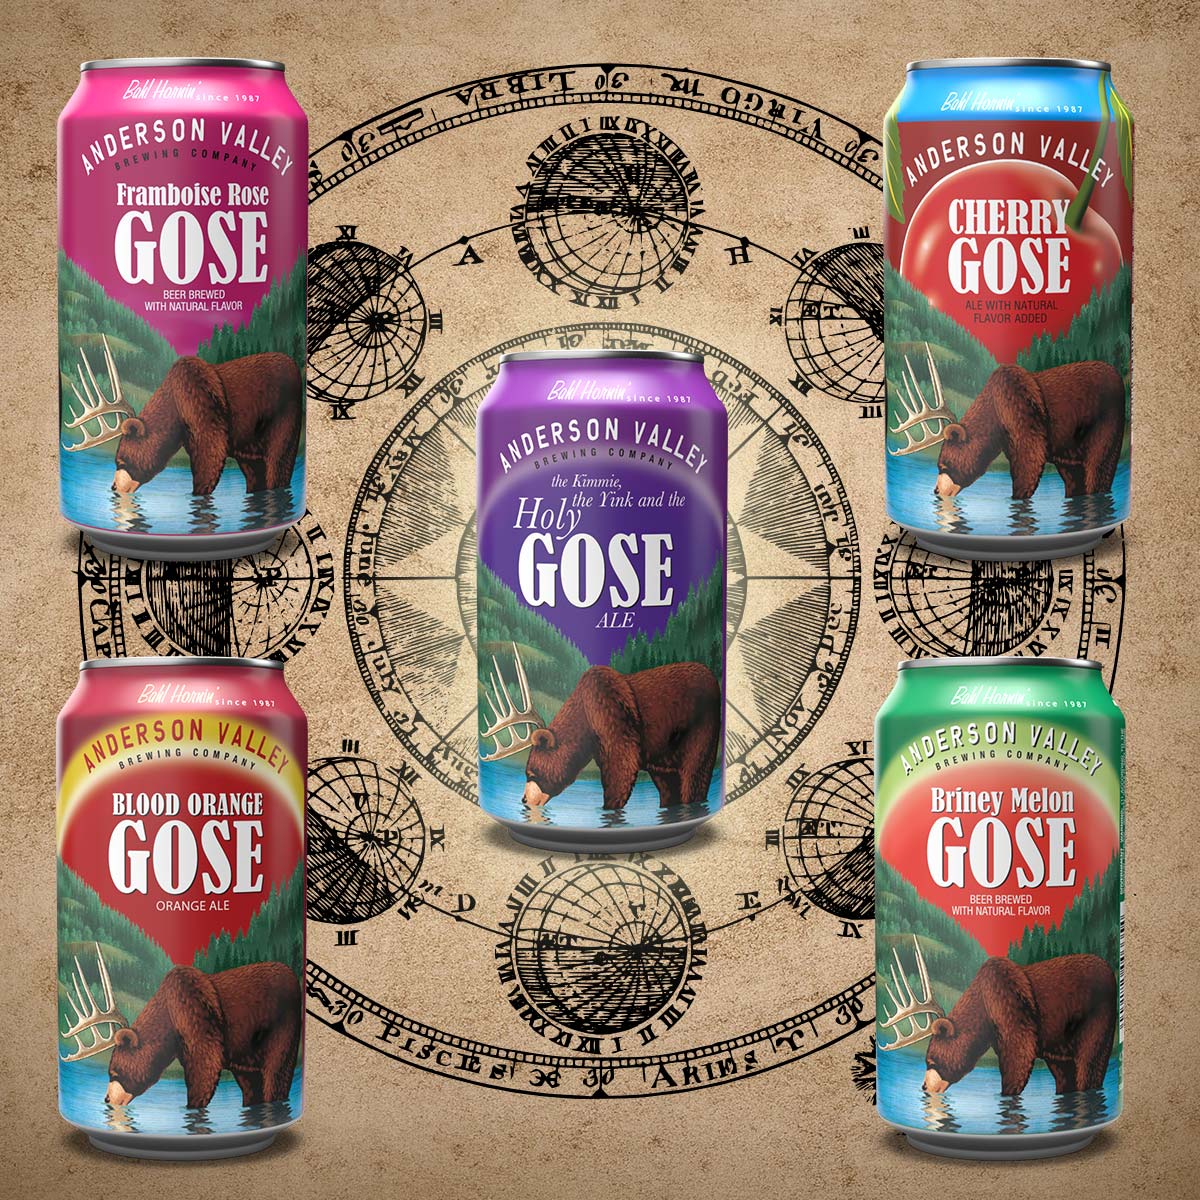 The Return of the Holy Gose